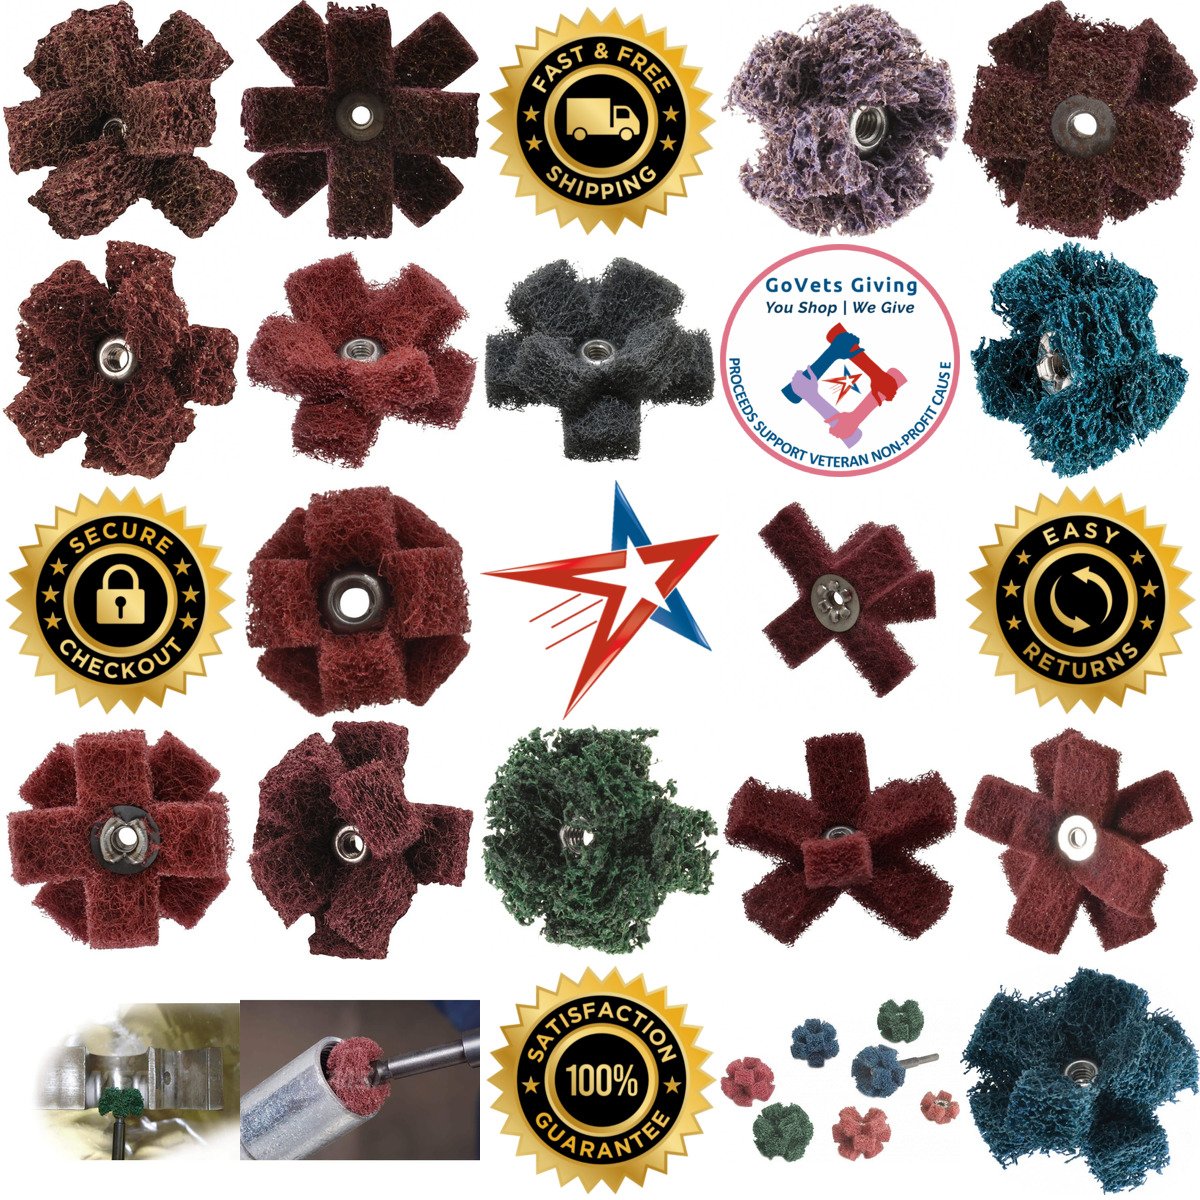 A selection of Cross Buffs products on GoVets